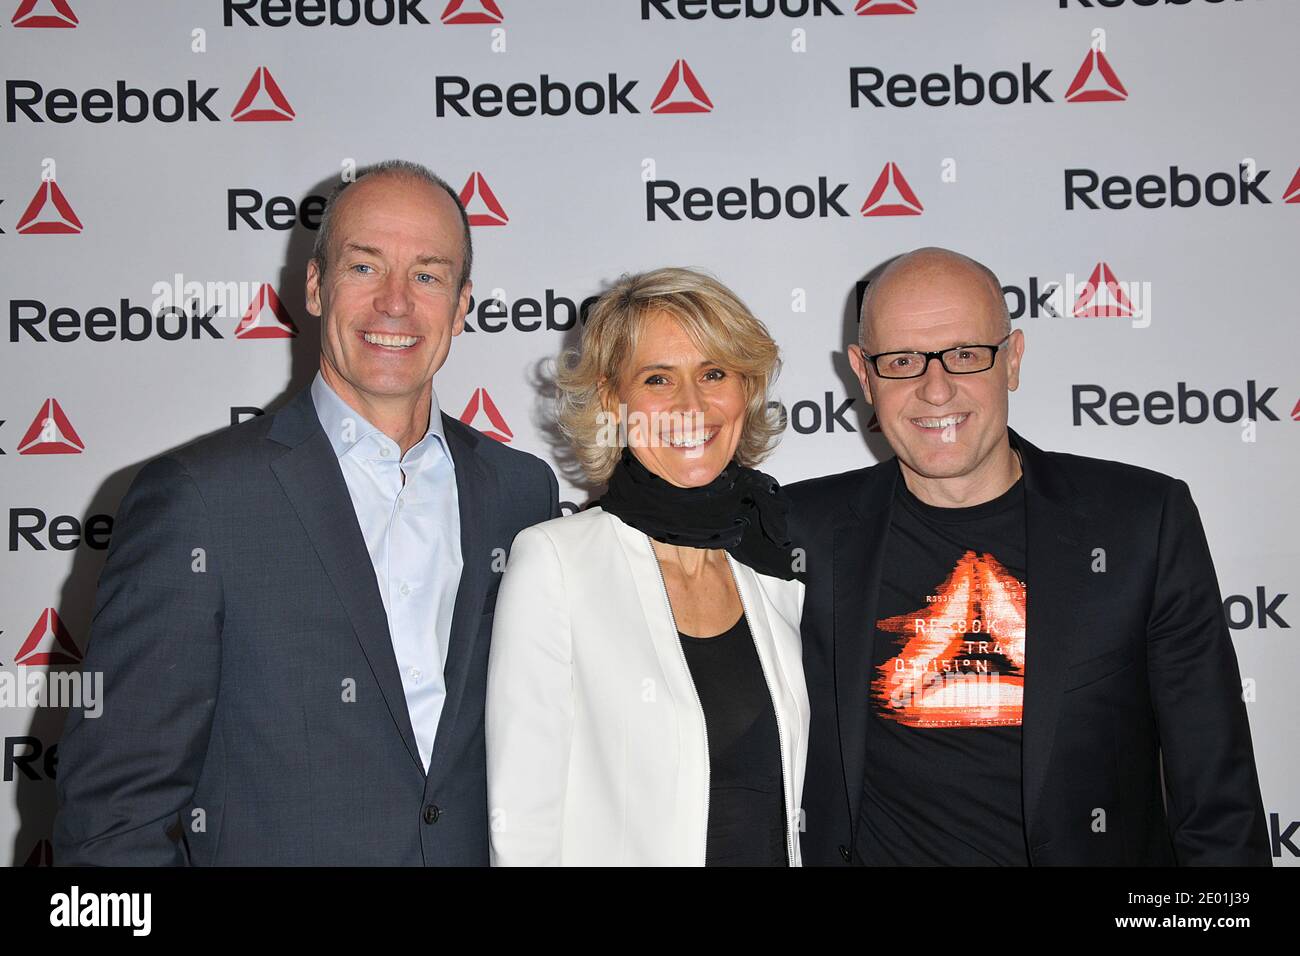 Matt O'Toole,Sandrine Retailleau and Alain Pourcelot attending the Reebok  Concept Store Opening event at Avenue de L'Opera in Paris, France on  December 4, 2013. Photo by Thierry Plessis/ABACAPRESS.COM Stock Photo -  Alamy